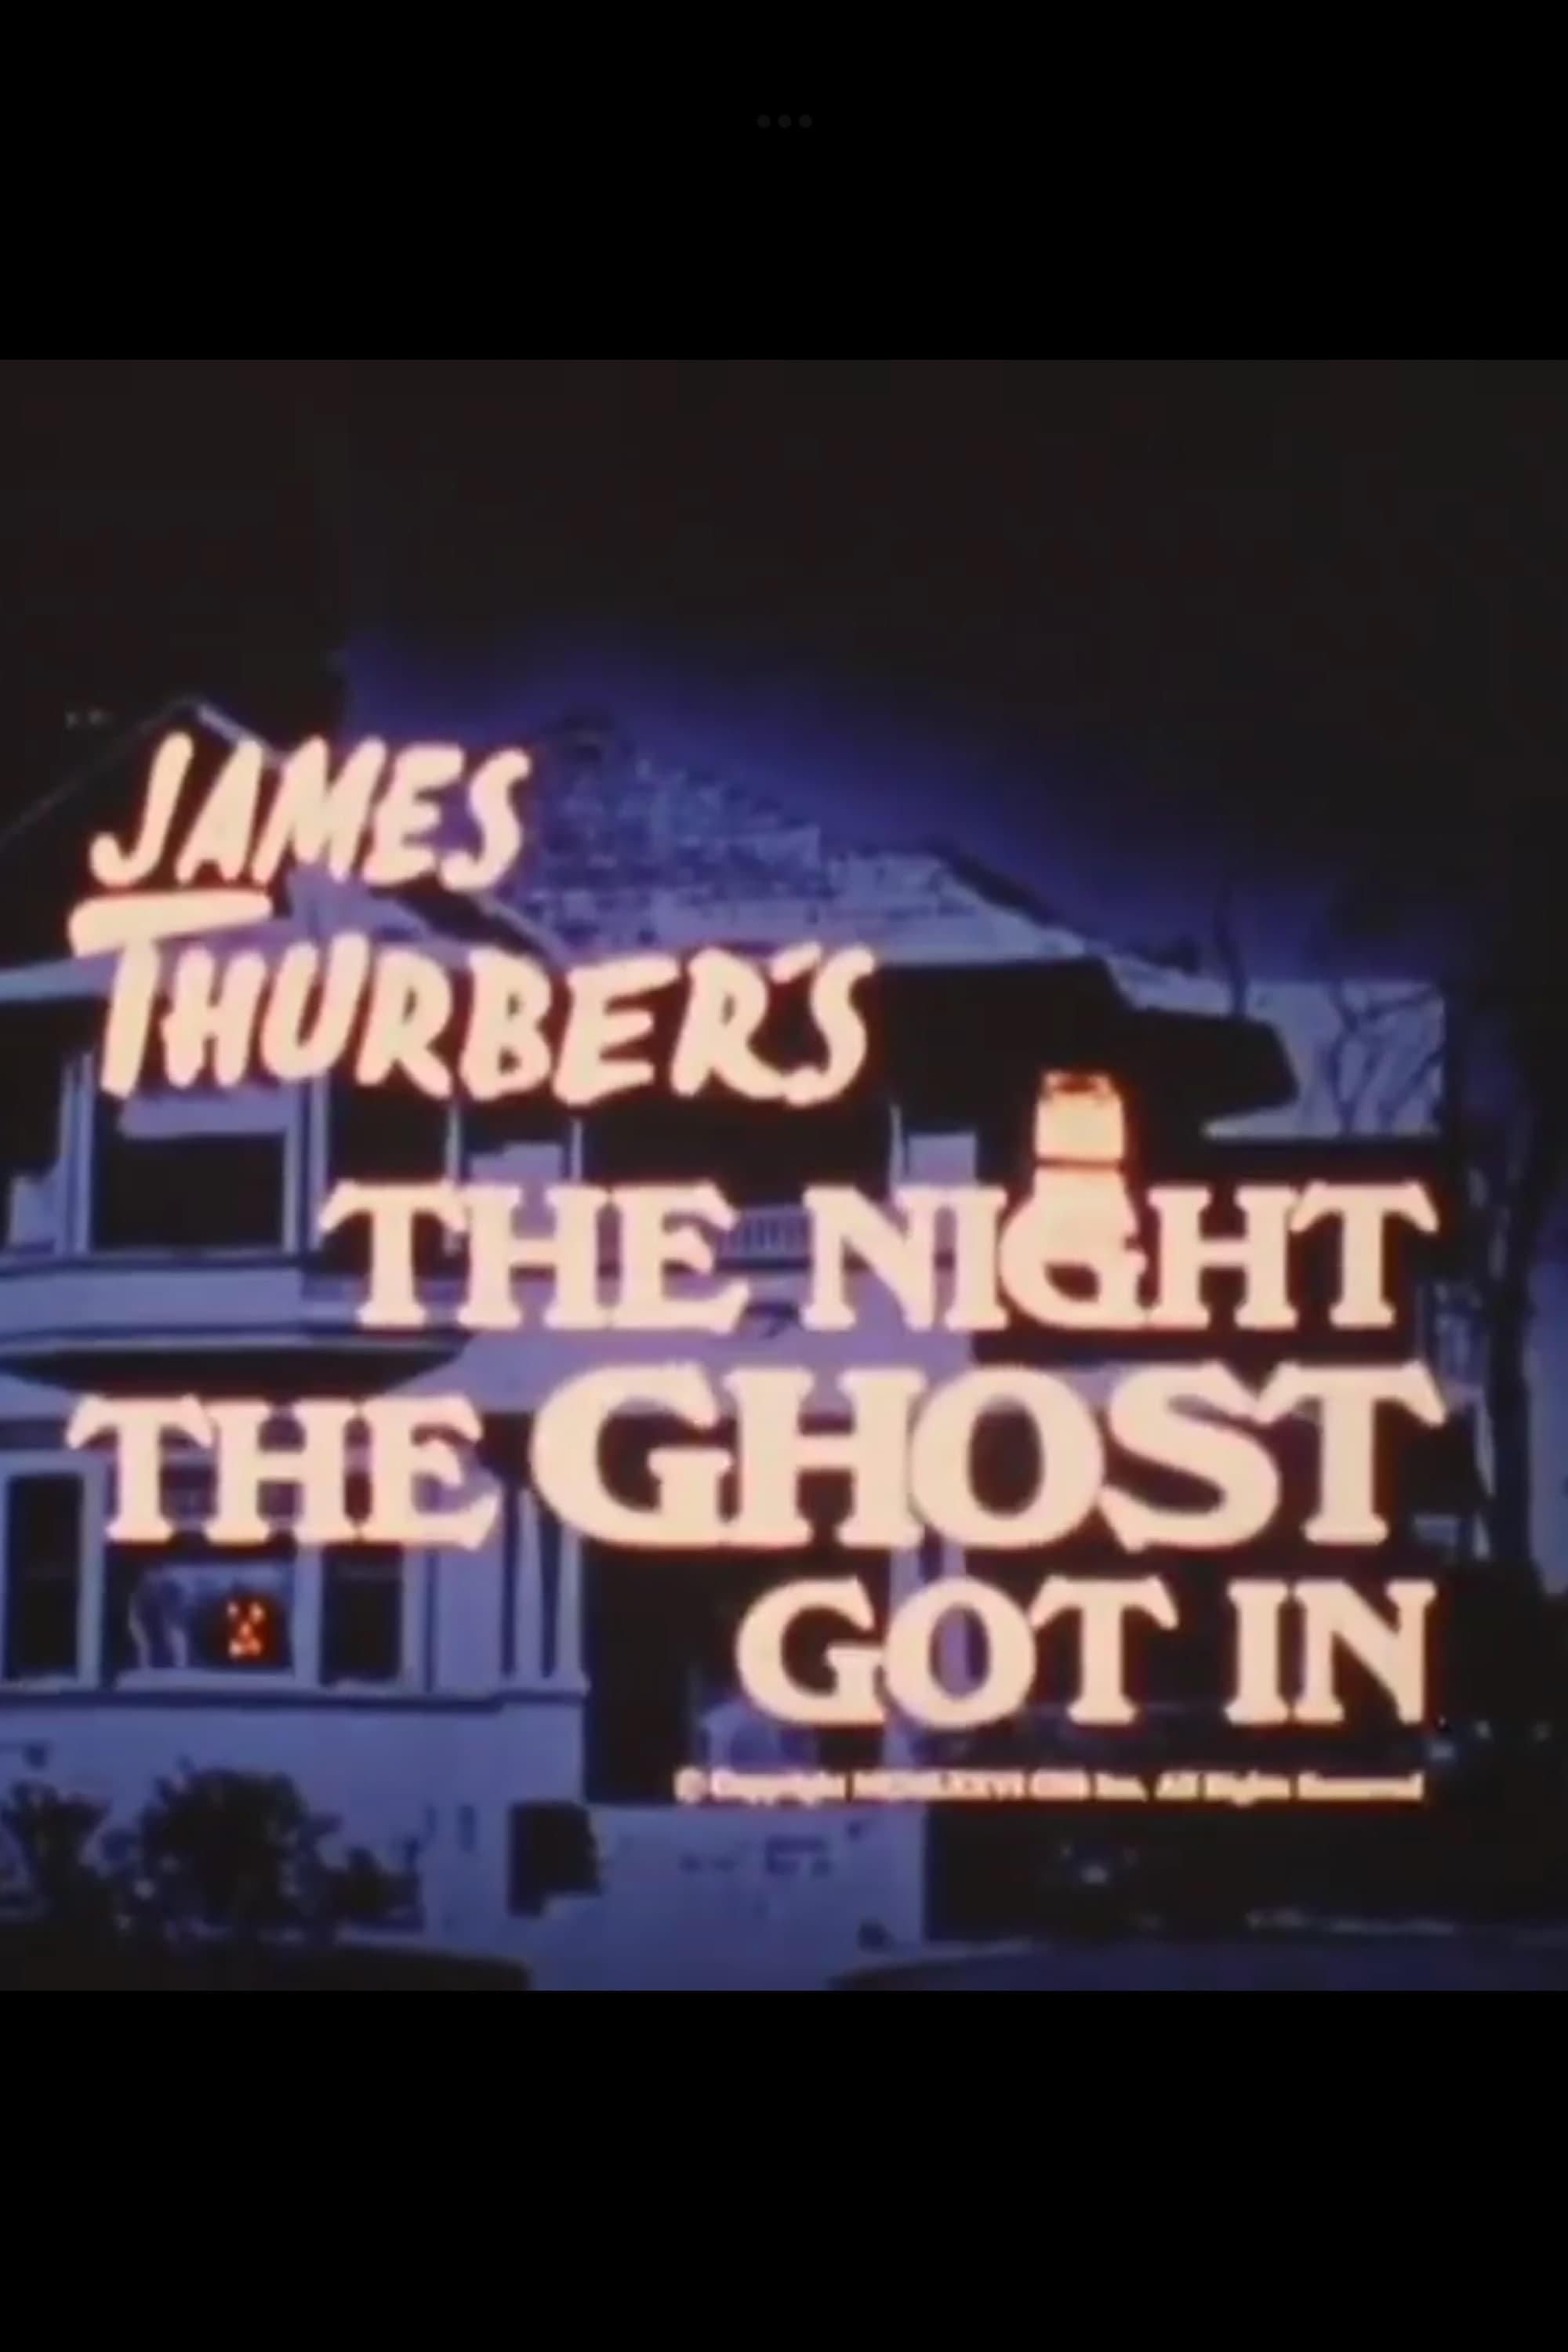 James Thurber’s The Night the Ghost Got In